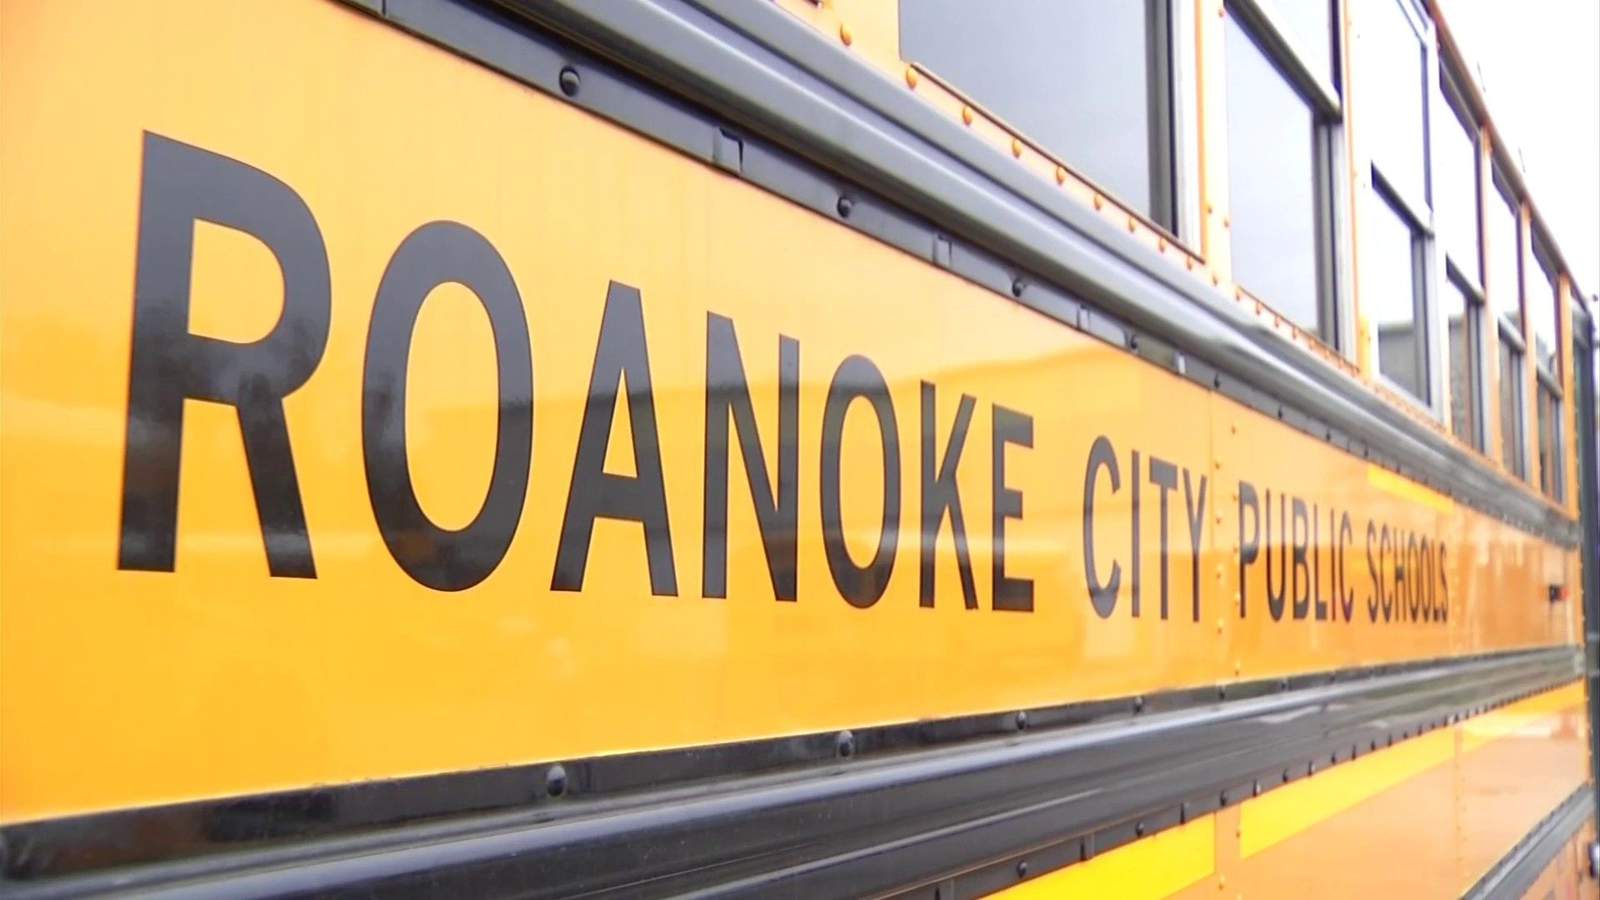 Bus driver for Roanoke City Public Schools dies from COVID-19